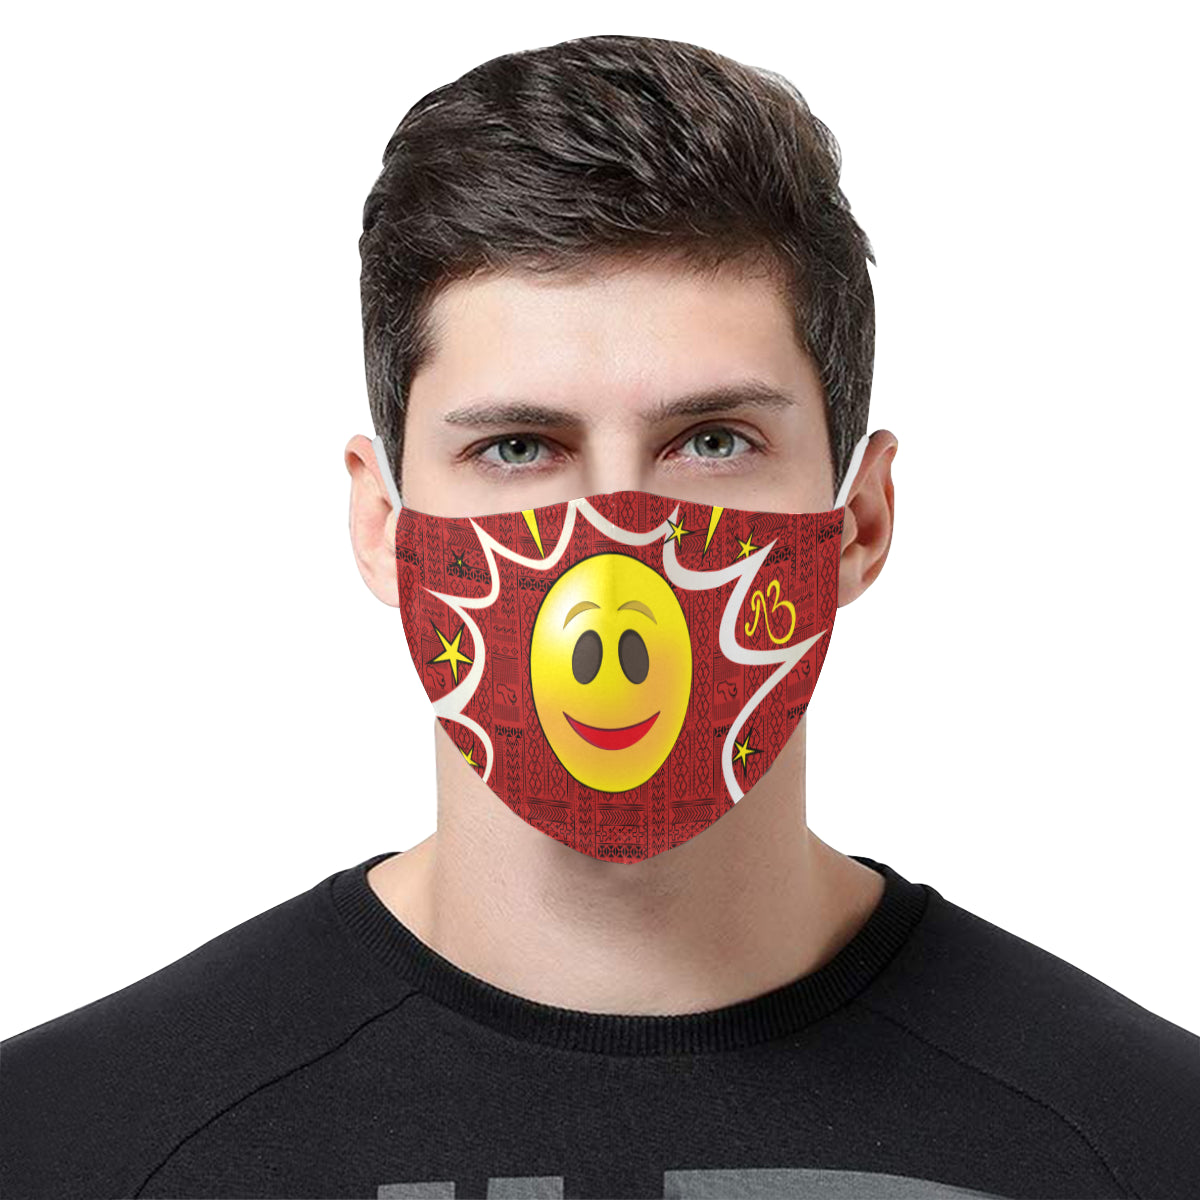 Classic Tribal Print Comic Emoji Cotton Fabric Face Mask with Filter Slot and Adjustable Strap - Non-medical use (2 Filters Included)